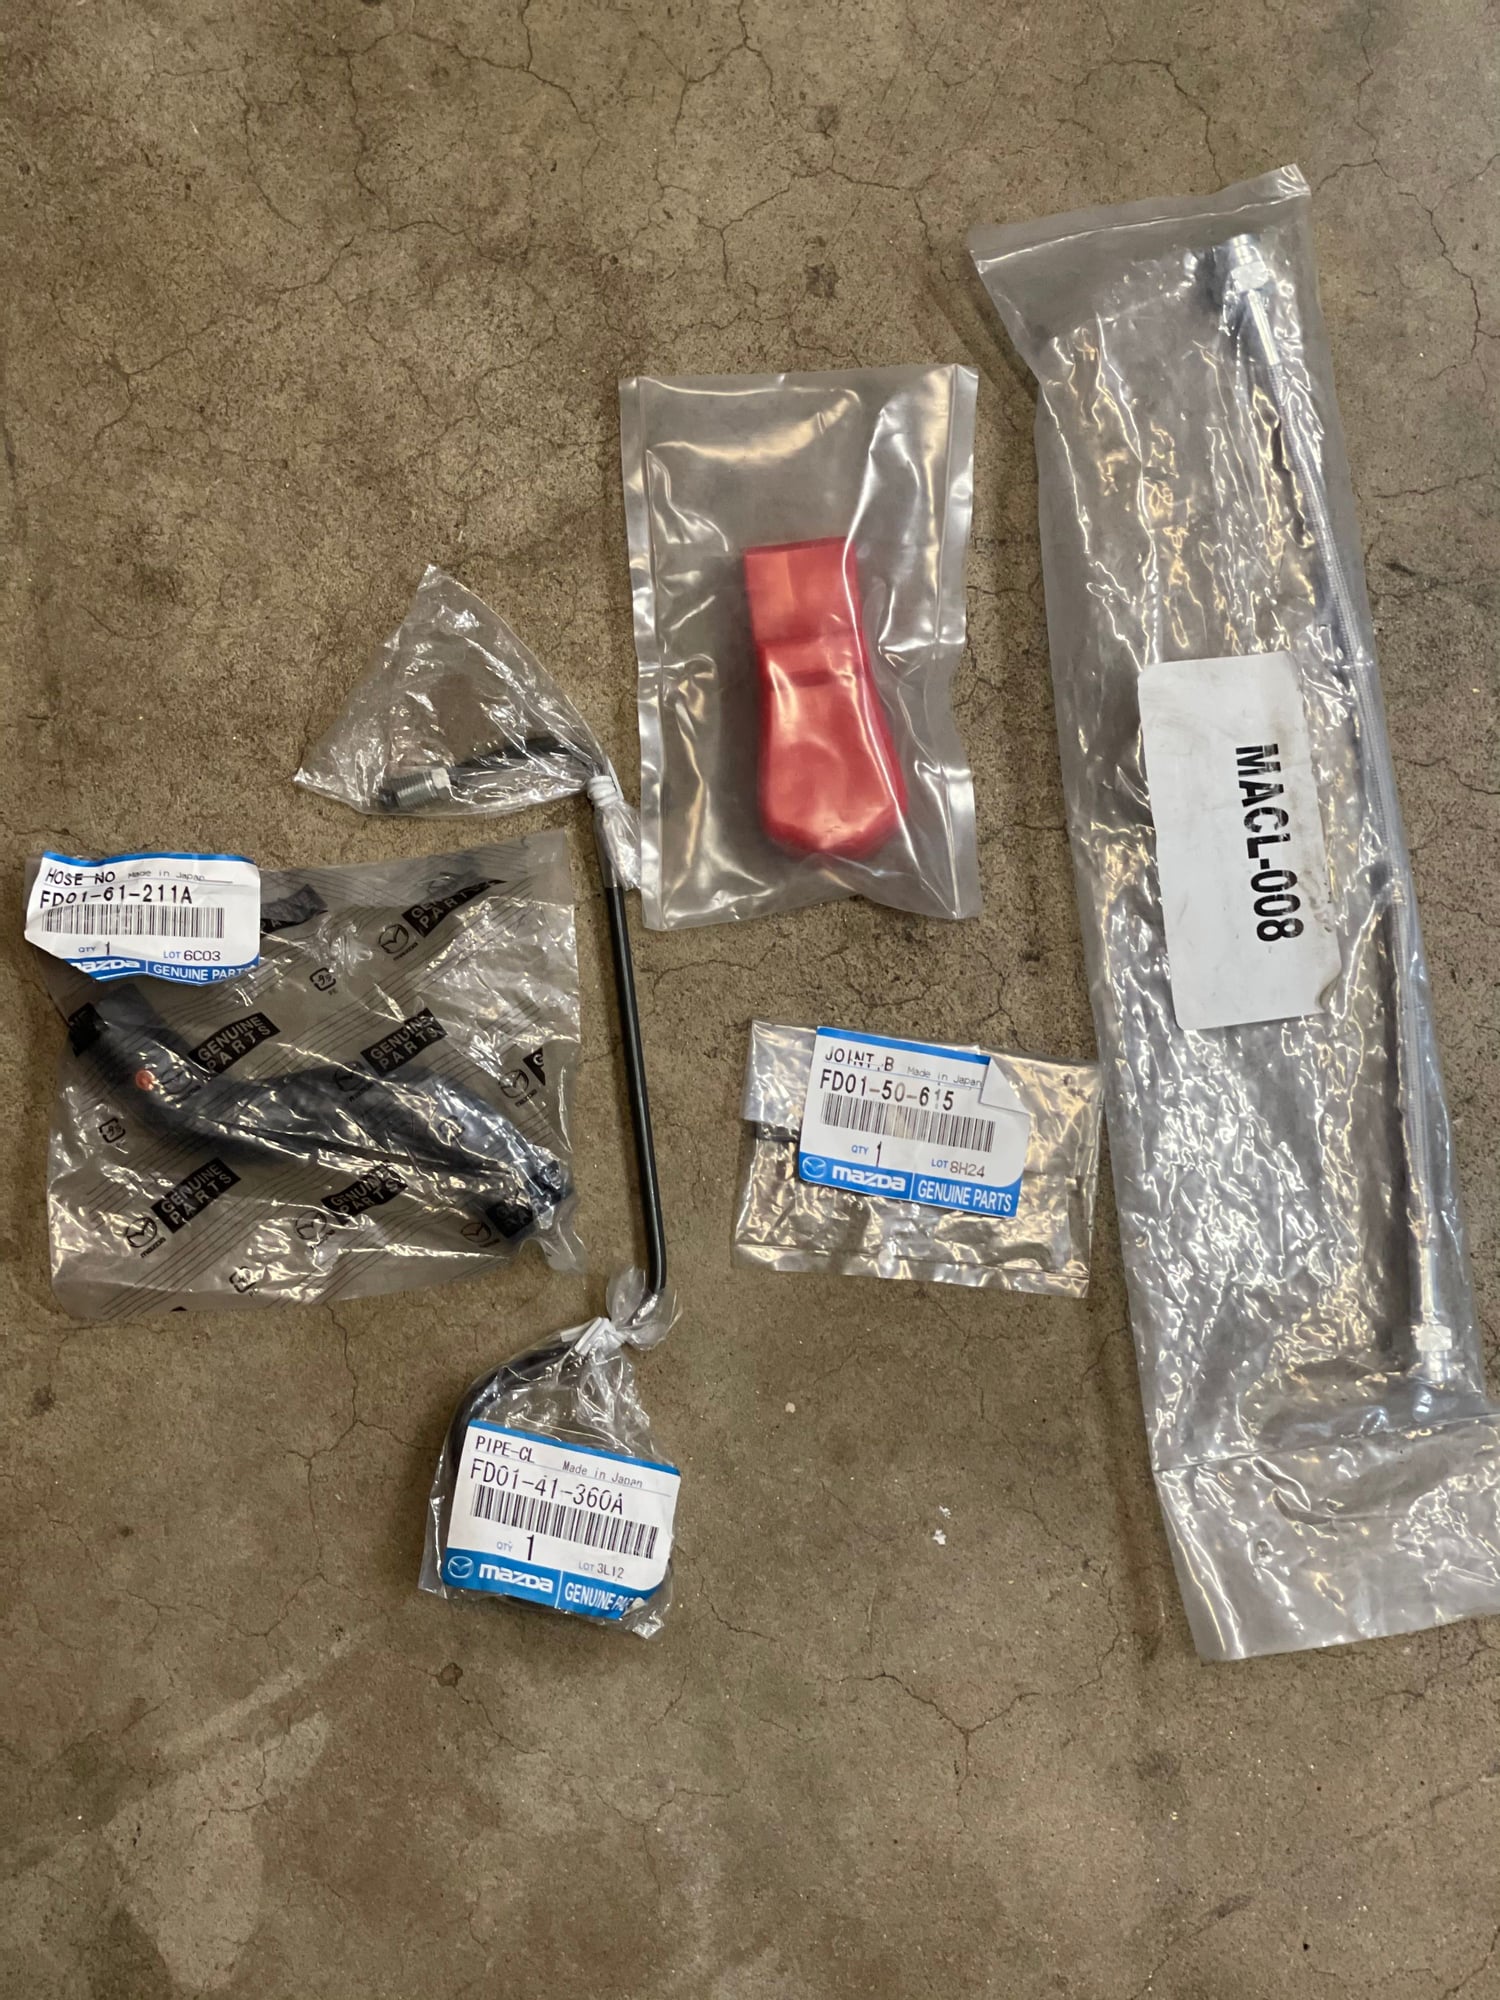 Miscellaneous - OEM parts new, stainless clutch line, bubble tech , bonez cat - Used - 1993 to 1995 Mazda RX-7 - Sacramento, CA 95662, United States